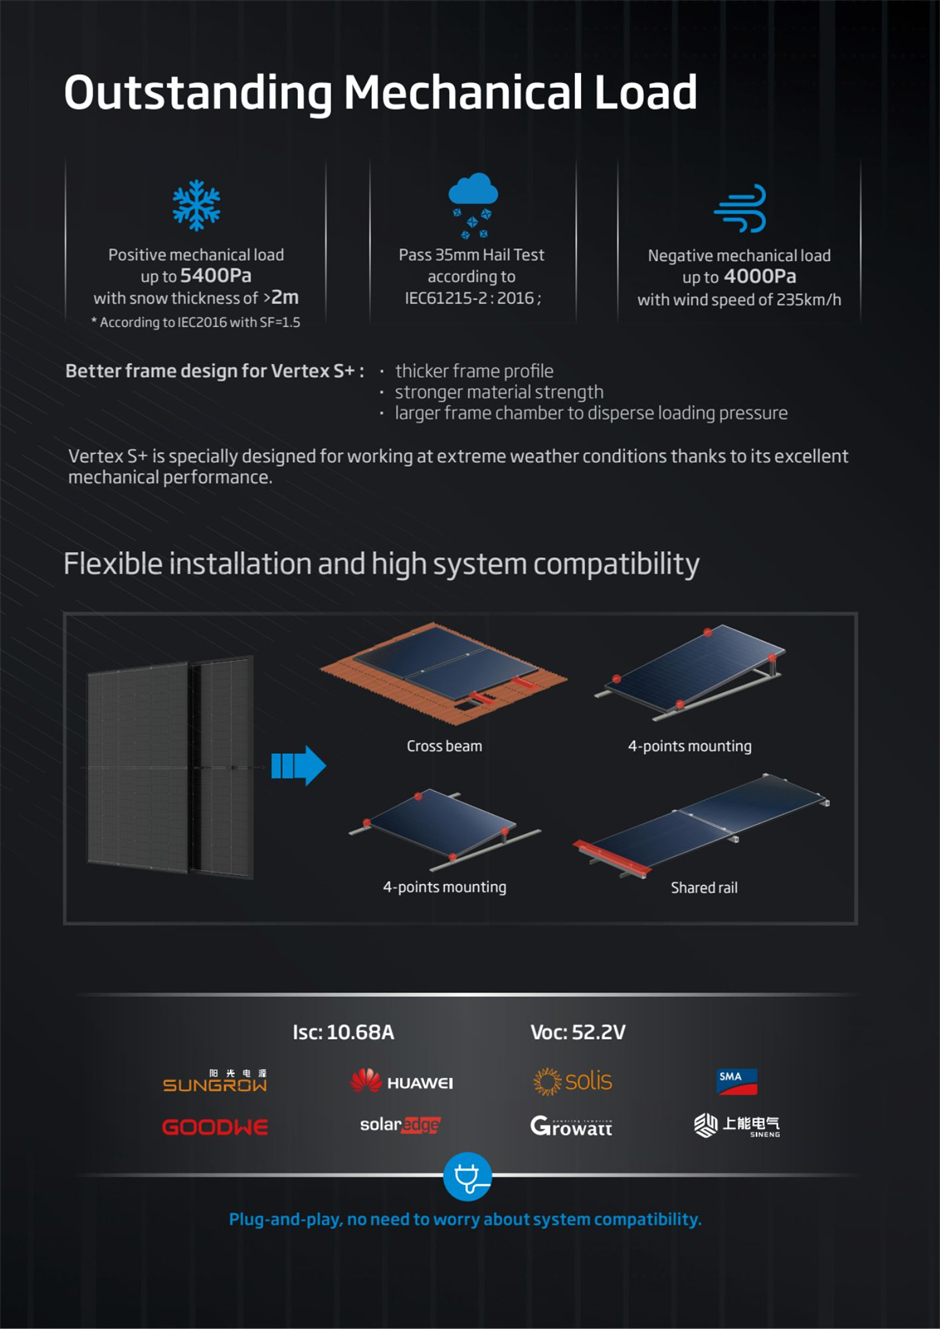 The Vertex S+ Full Black solar module also comes with outstanding mechanical load, flexible installation, and high system compatibility.
